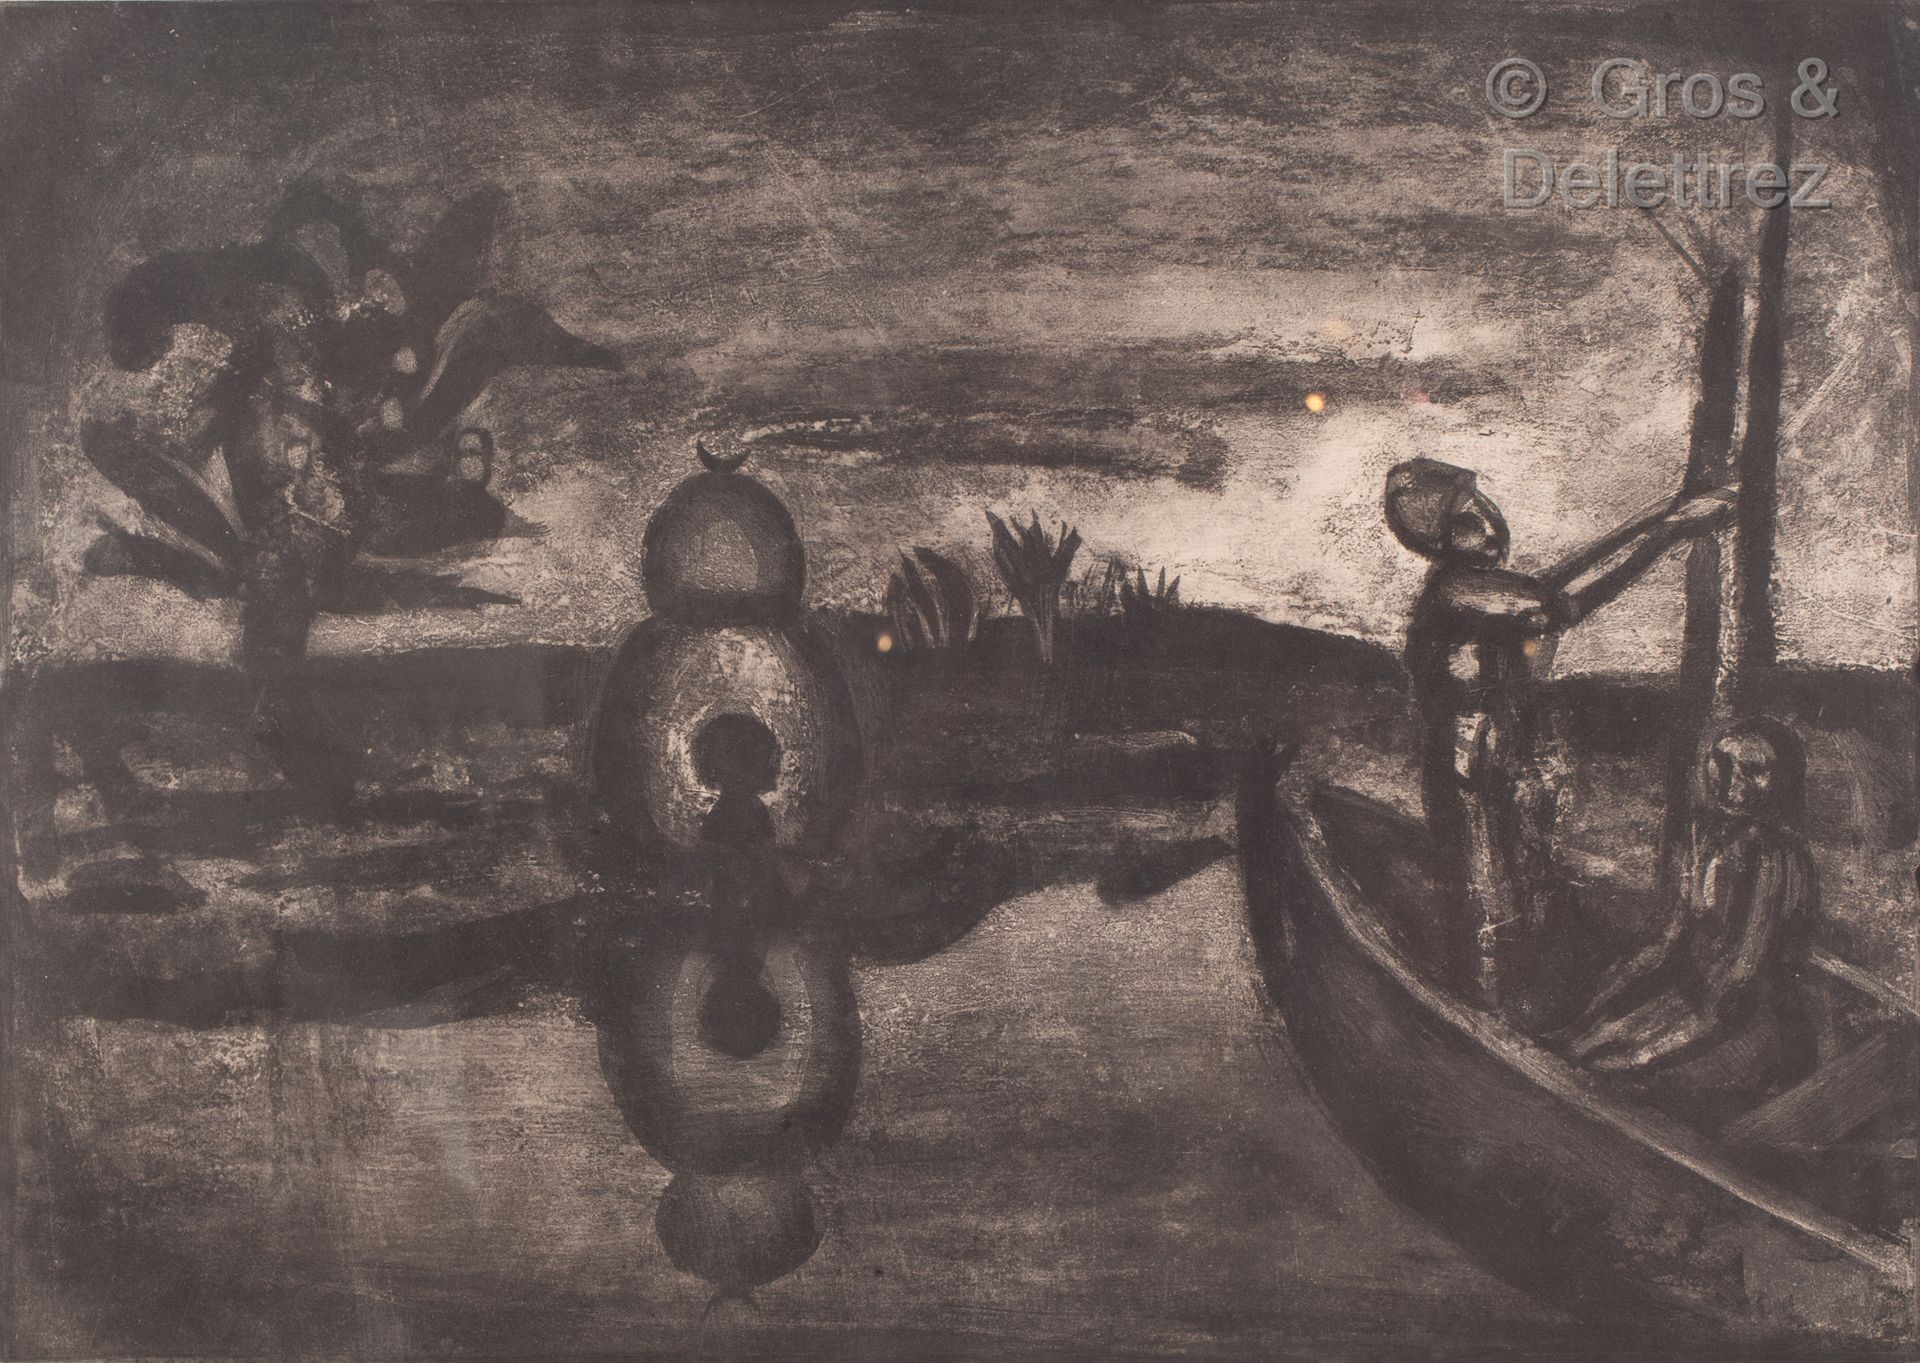 Georges ROUAULT (1871 -1958) "In the land of thirst and fear". Plate XXVI of the&hellip;